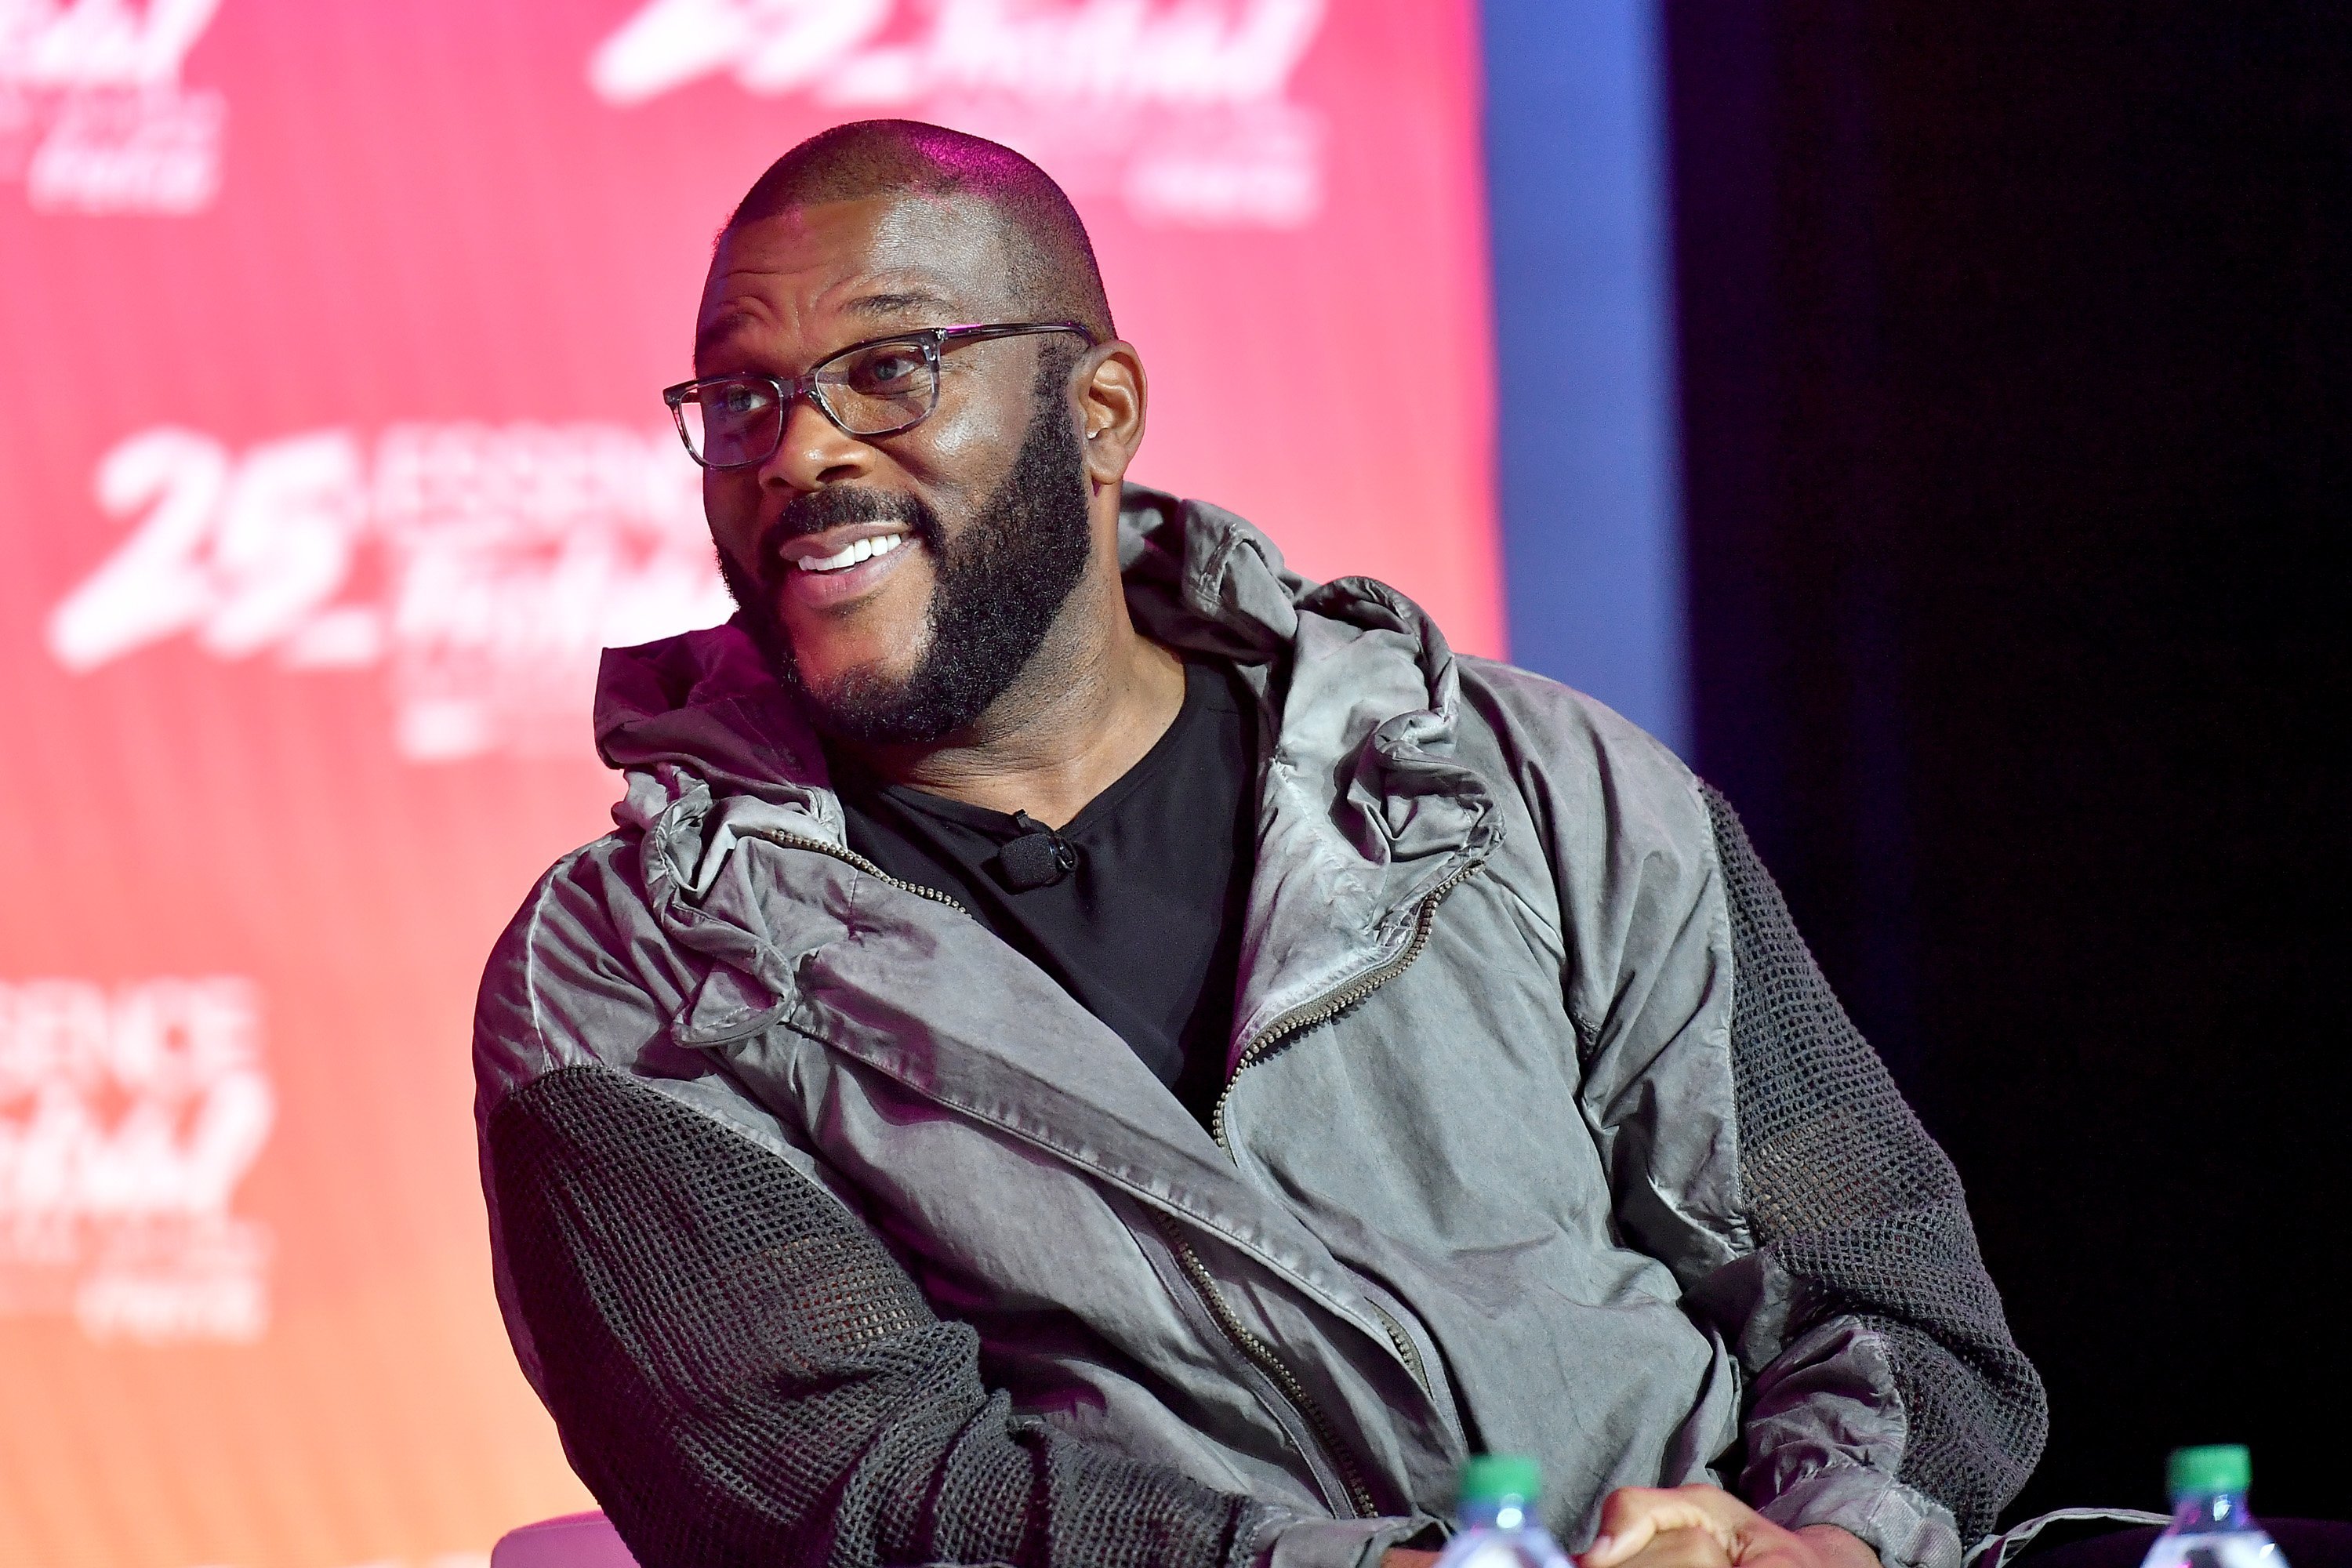 Tyler Perry at the ESSENCE Festival in New Orleans, Louisiana on July 07, 2019 | Photo: Getty Images